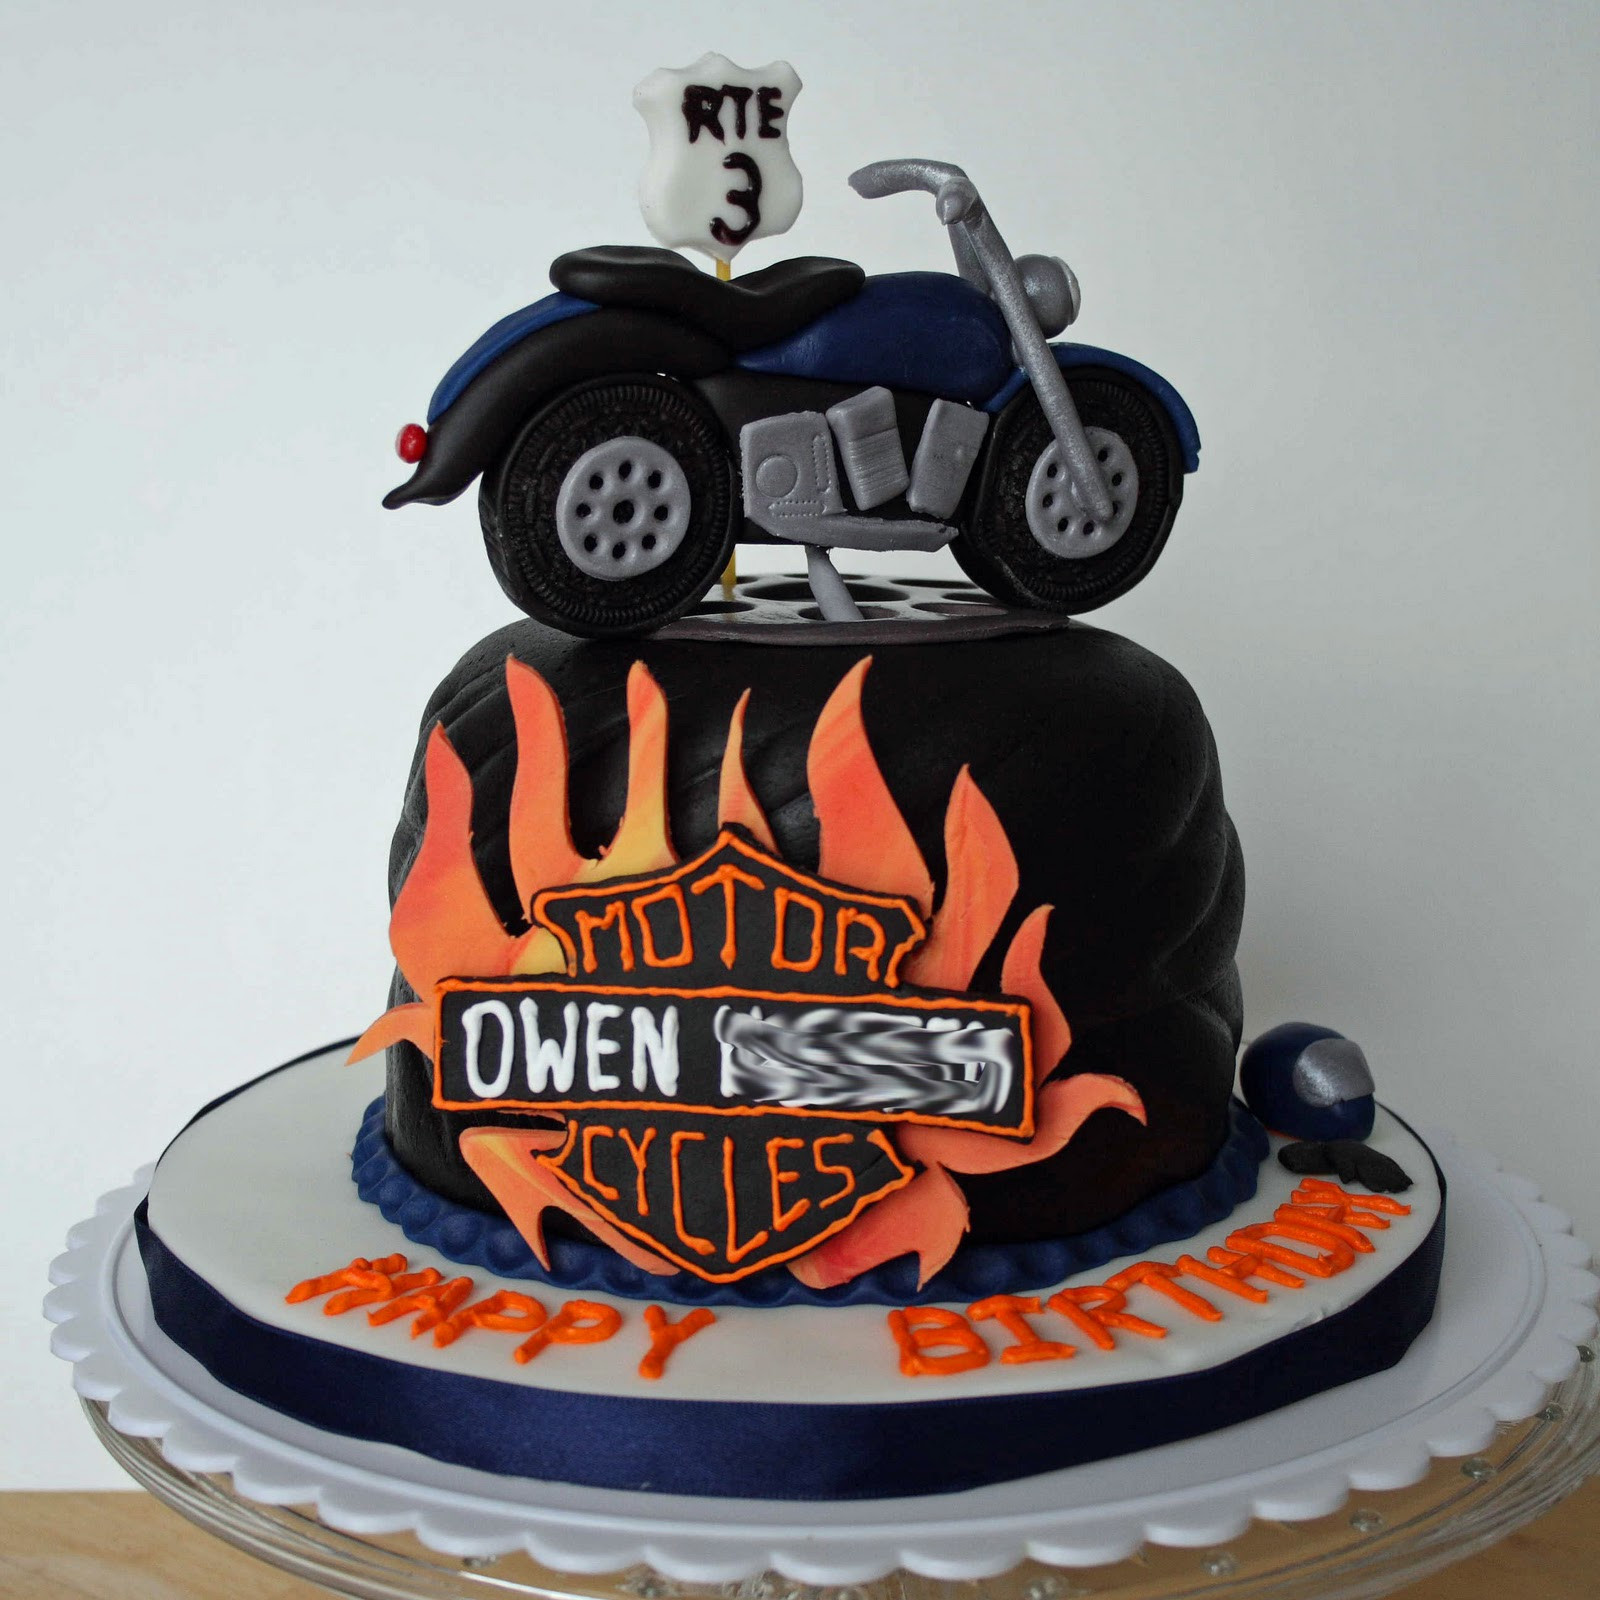 Motorcycle Birthday Cake
 All Kinds of Sugar Motorcycle Birthday Cake